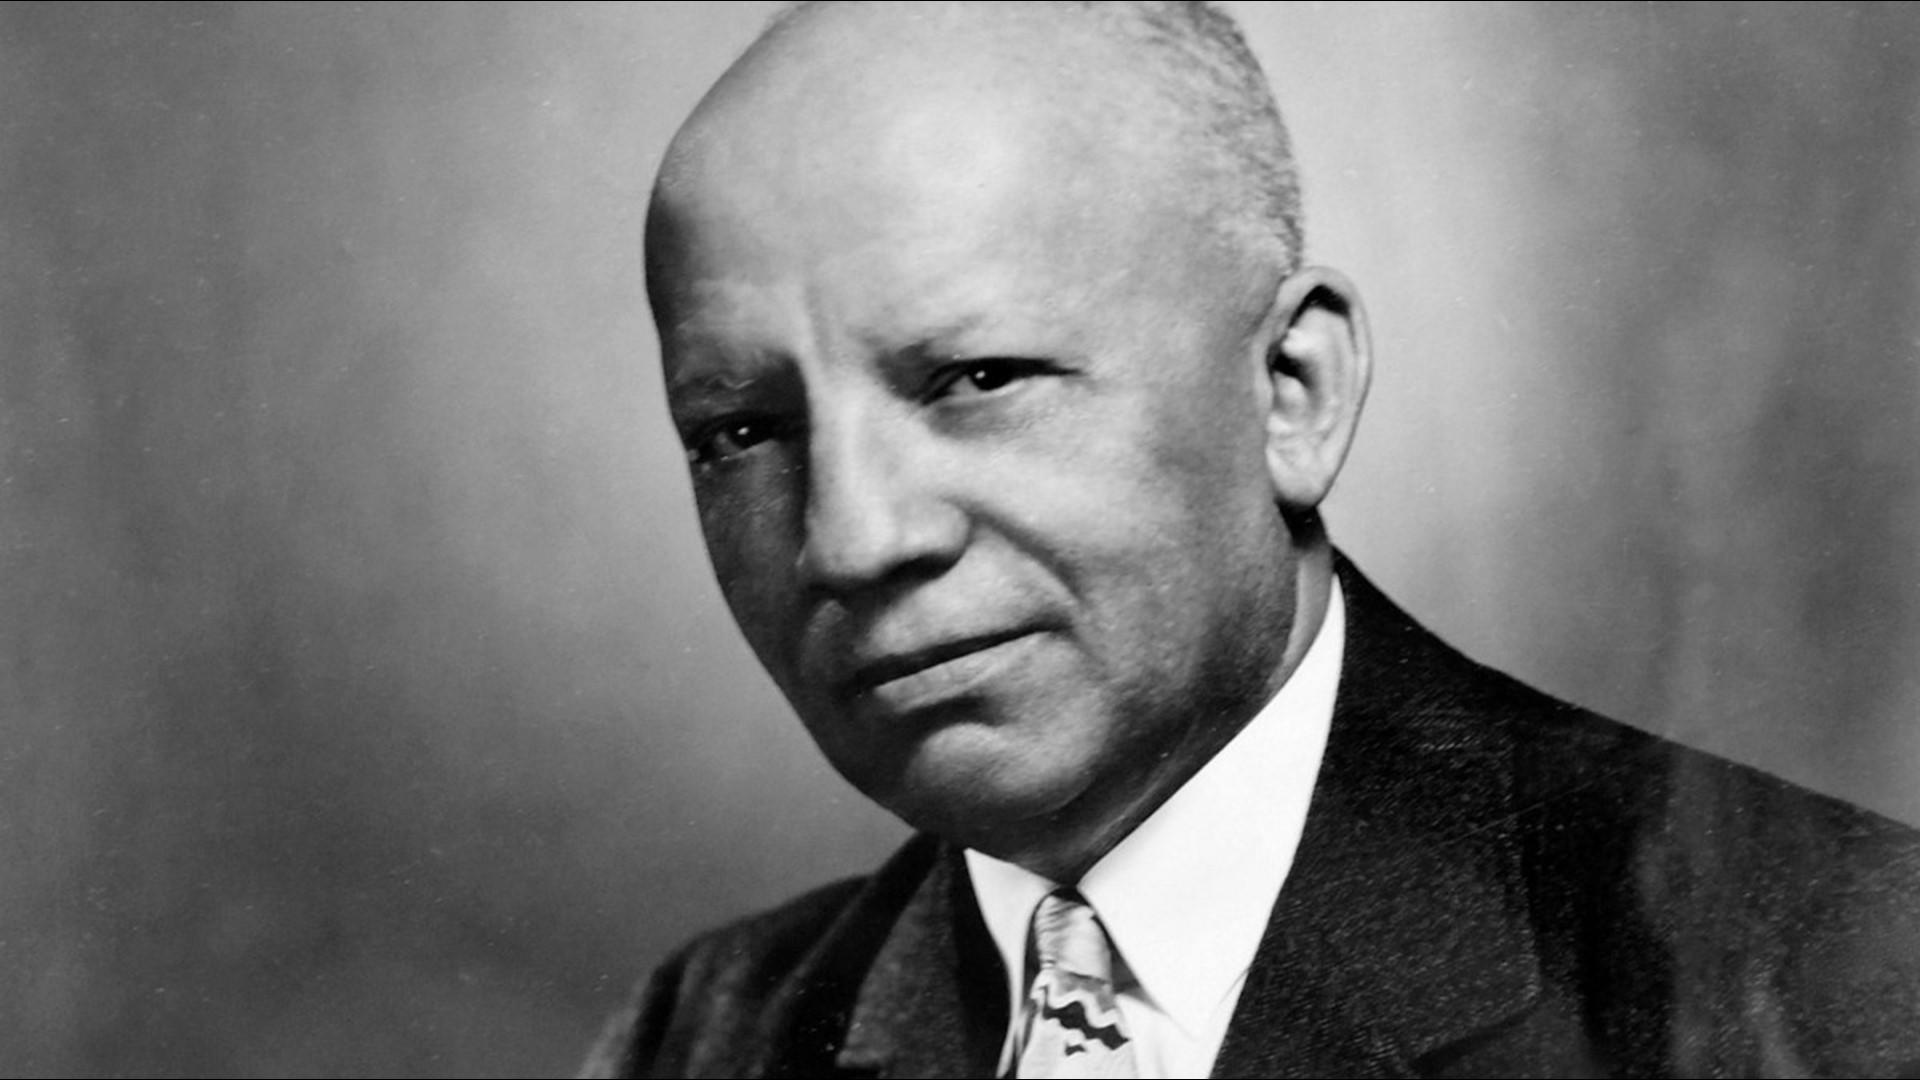 Kristen and Ellen' Black History Month profile features American Historian Dr. Carter G. Woodson, recognized for his role in the creation of Black History Month.